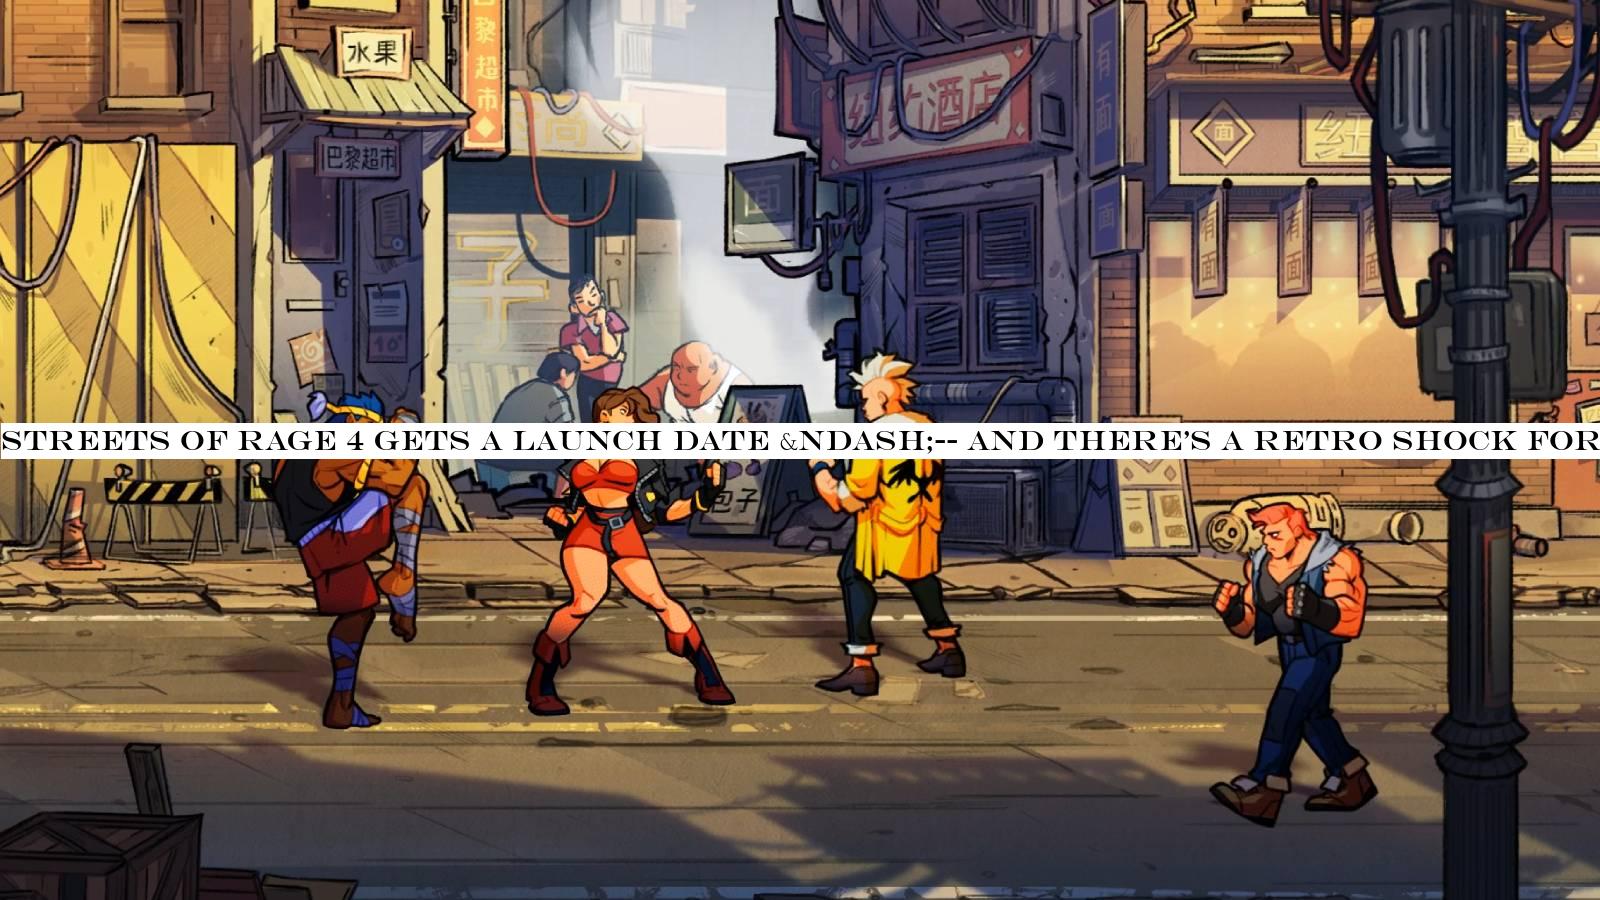 Streets of Rage 4 gets a release date & and there's a retro surprise for older fans